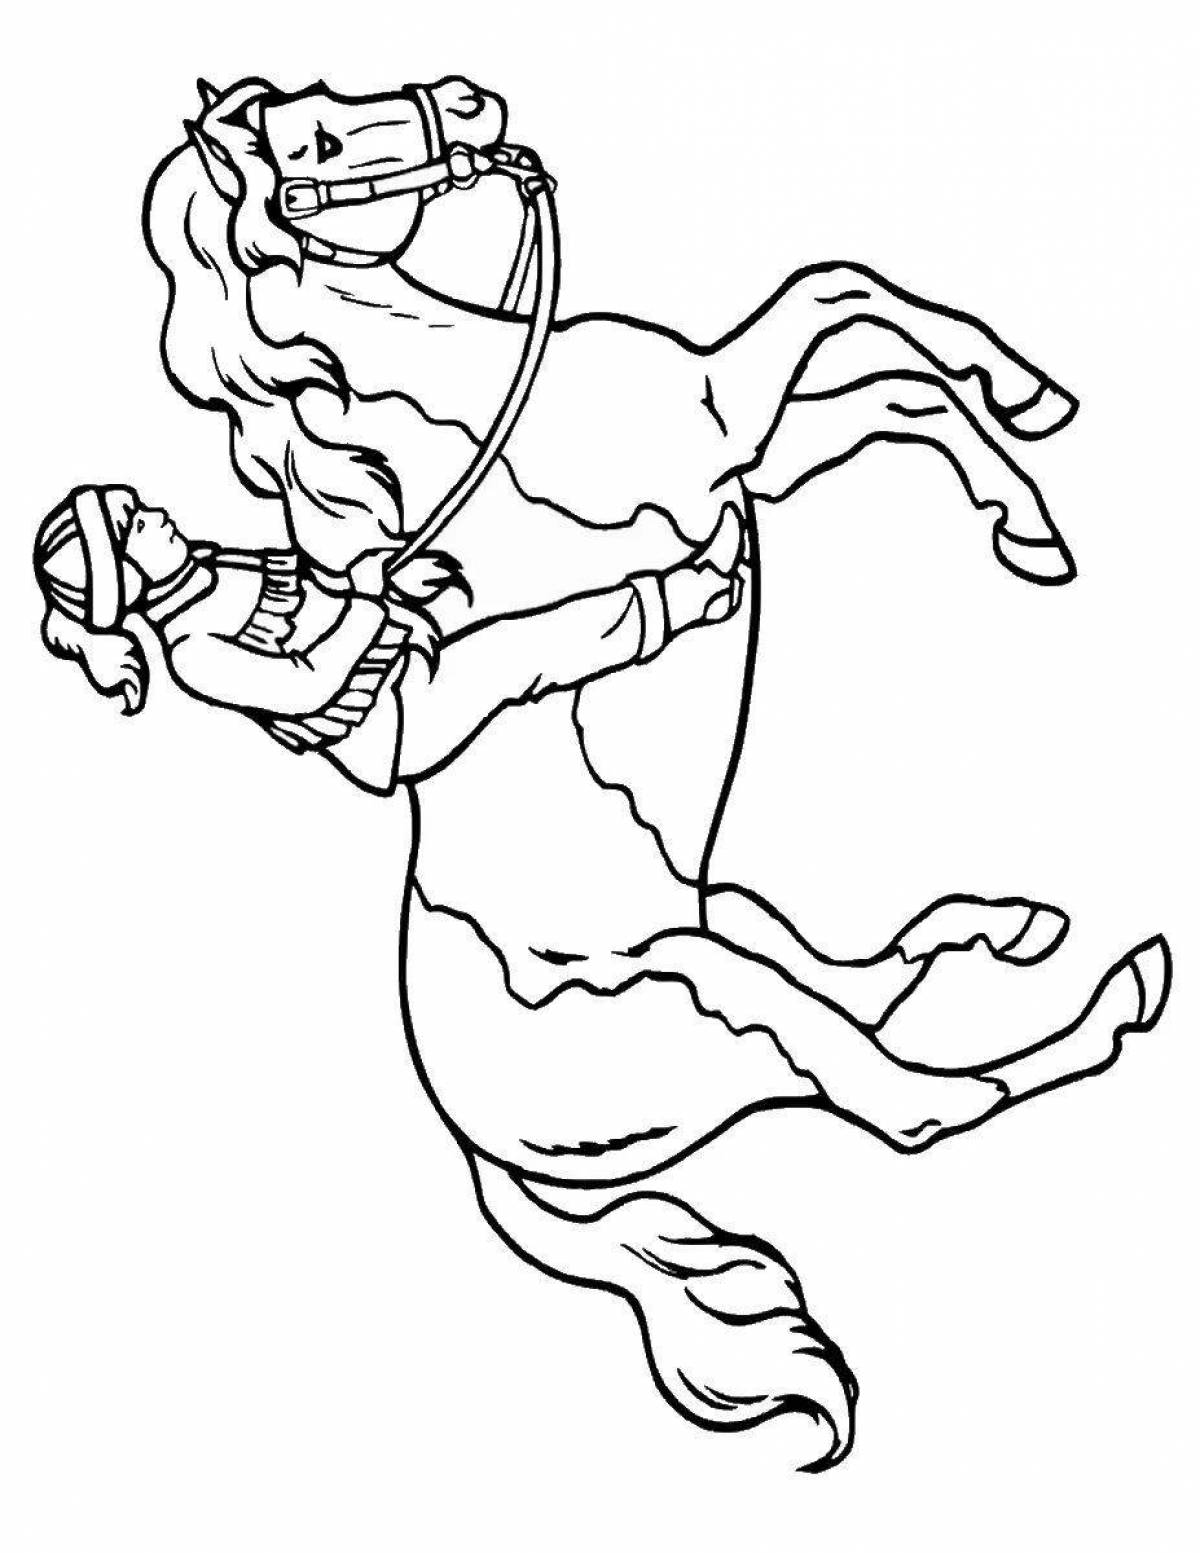 Coloring page wild rearing horse